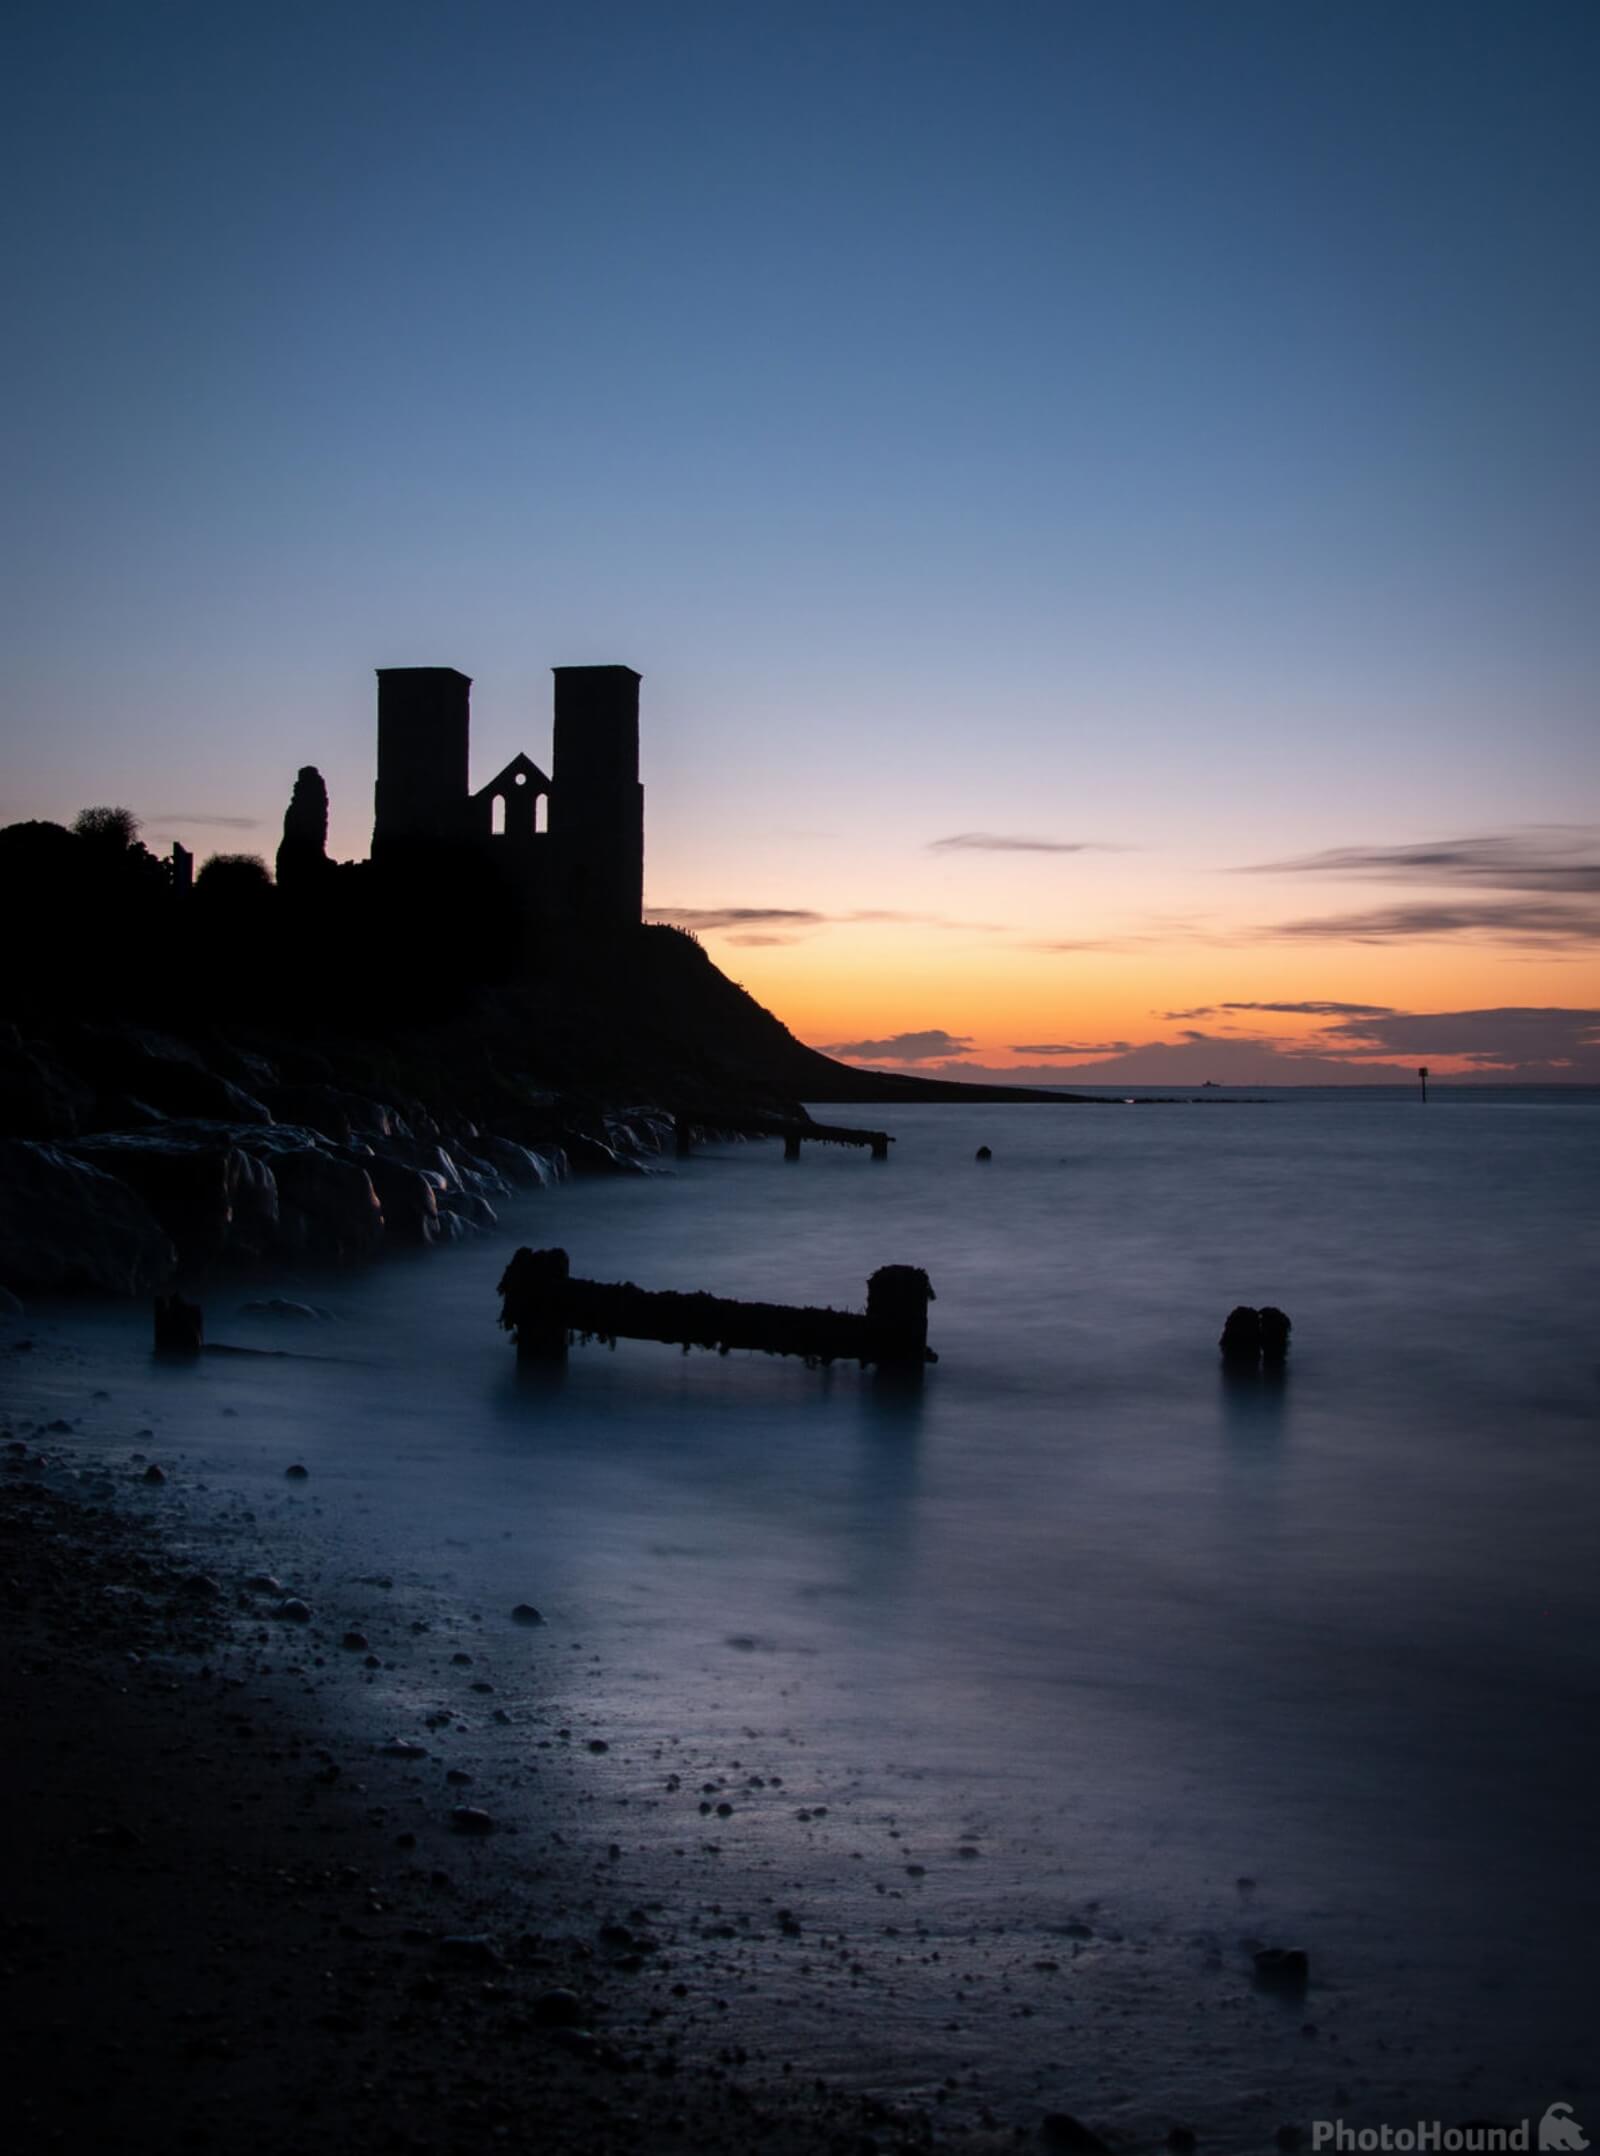 Image of Reculver Towers by James Stevens